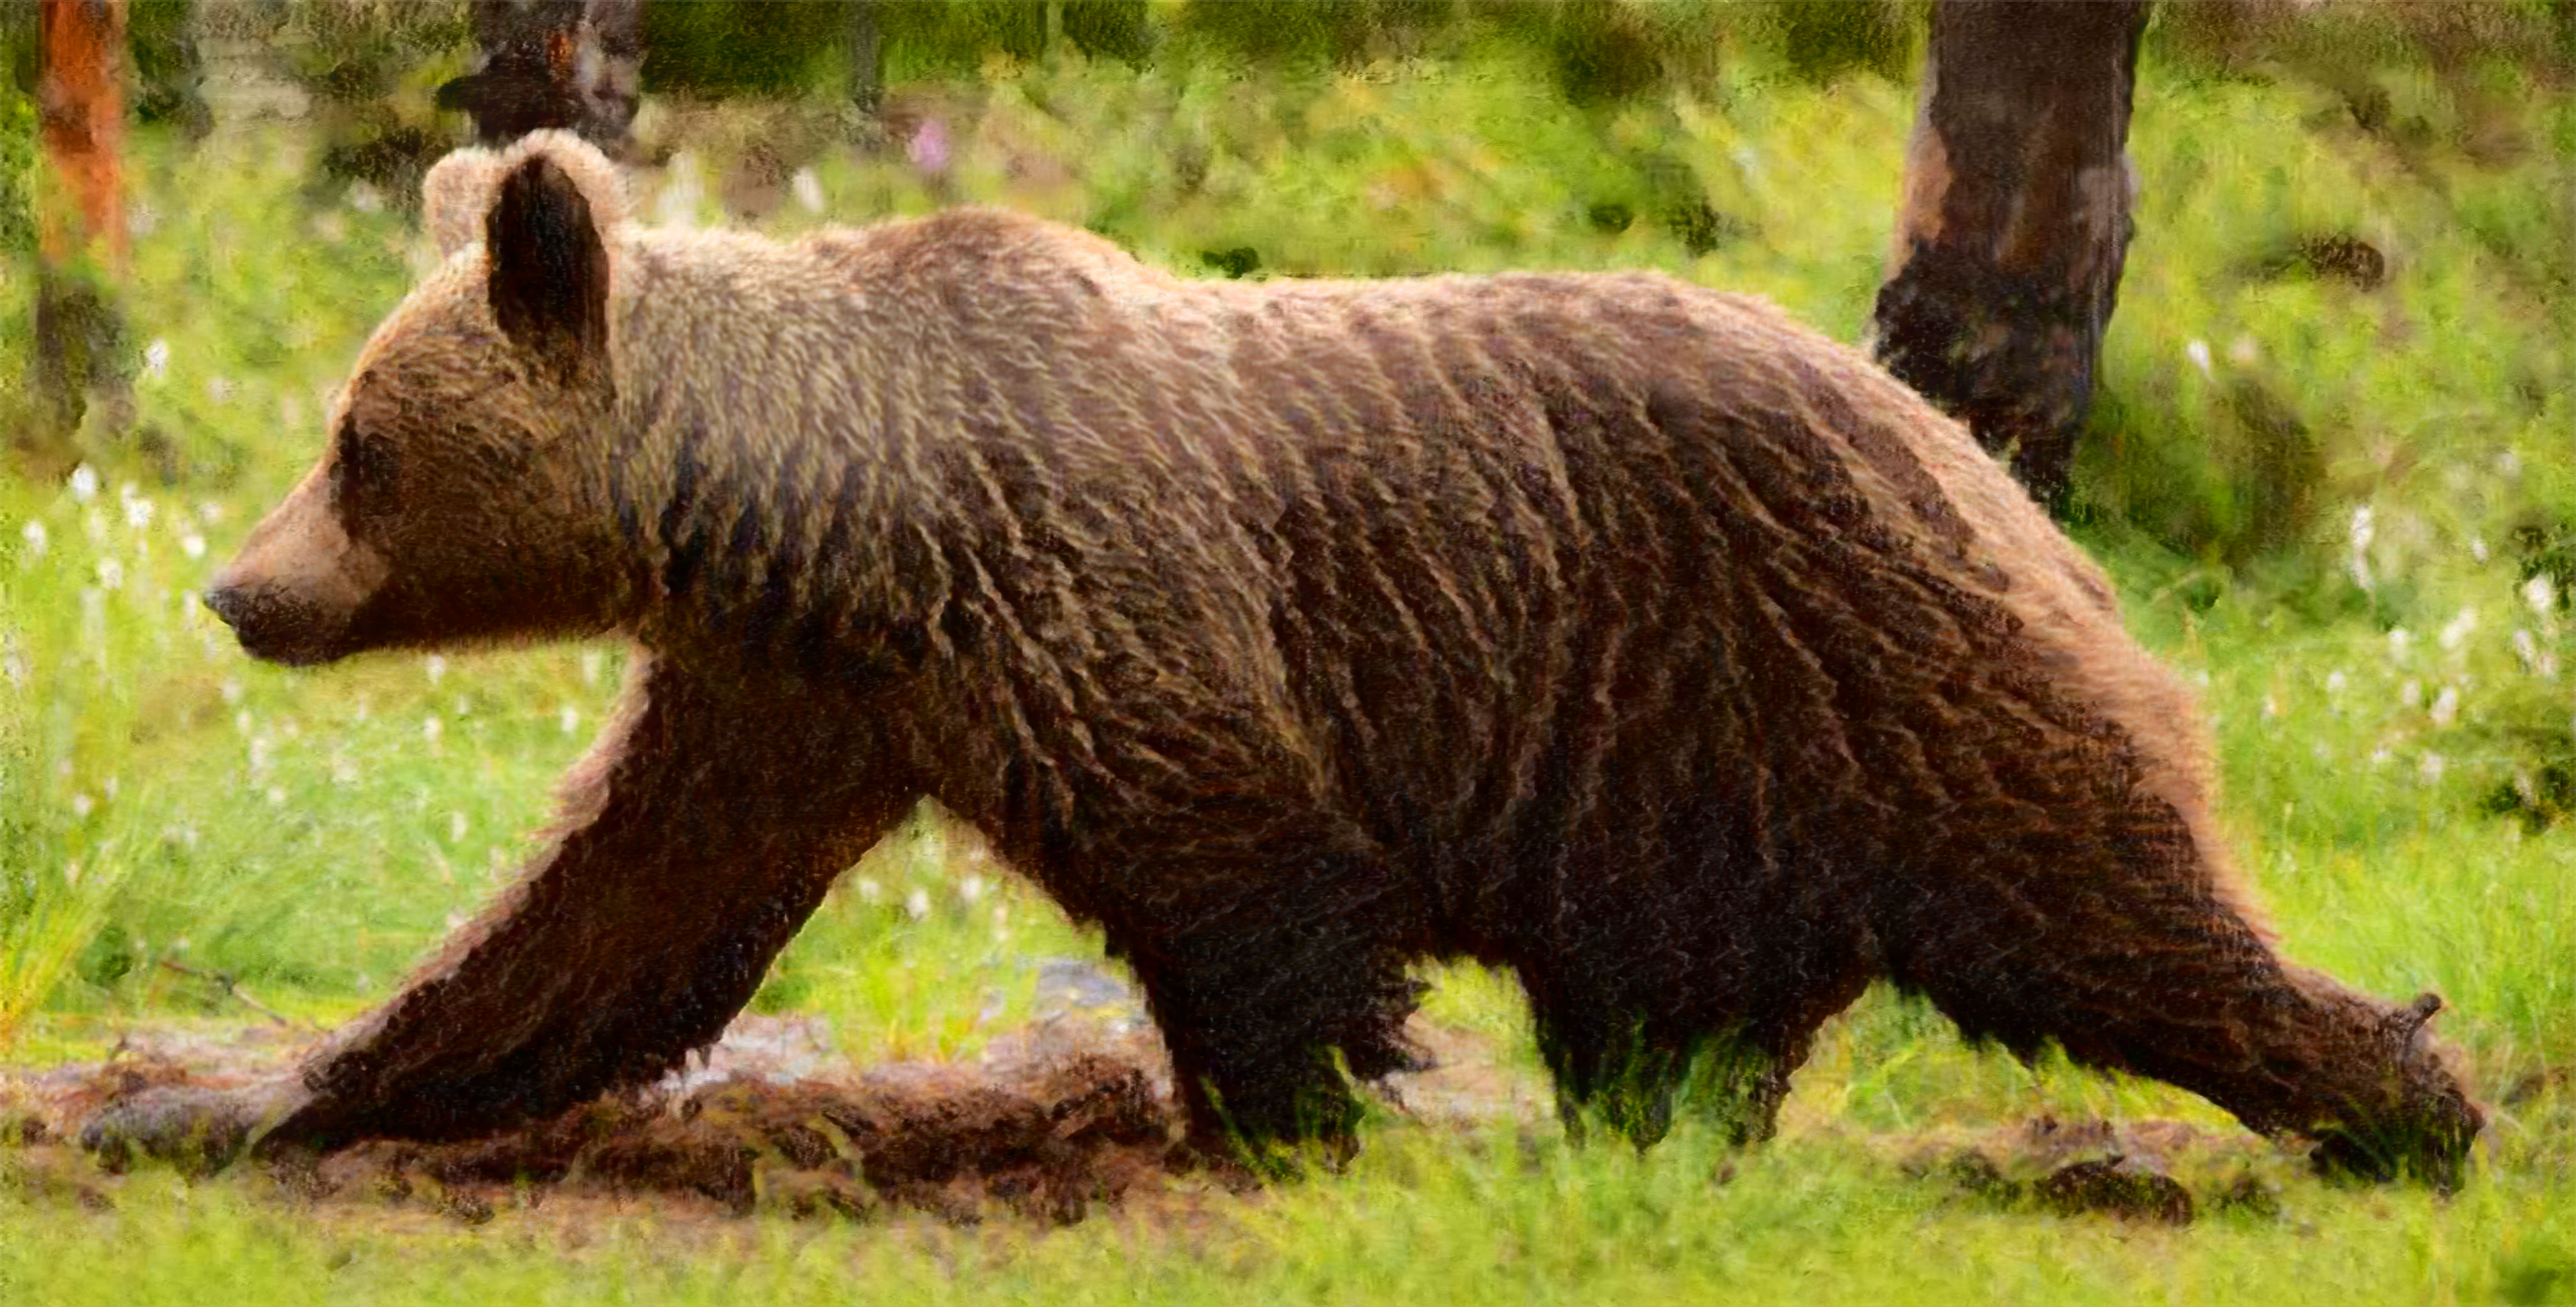 Response to Secretary of the Interior’s termination of North Cascades grizzly restoration plan